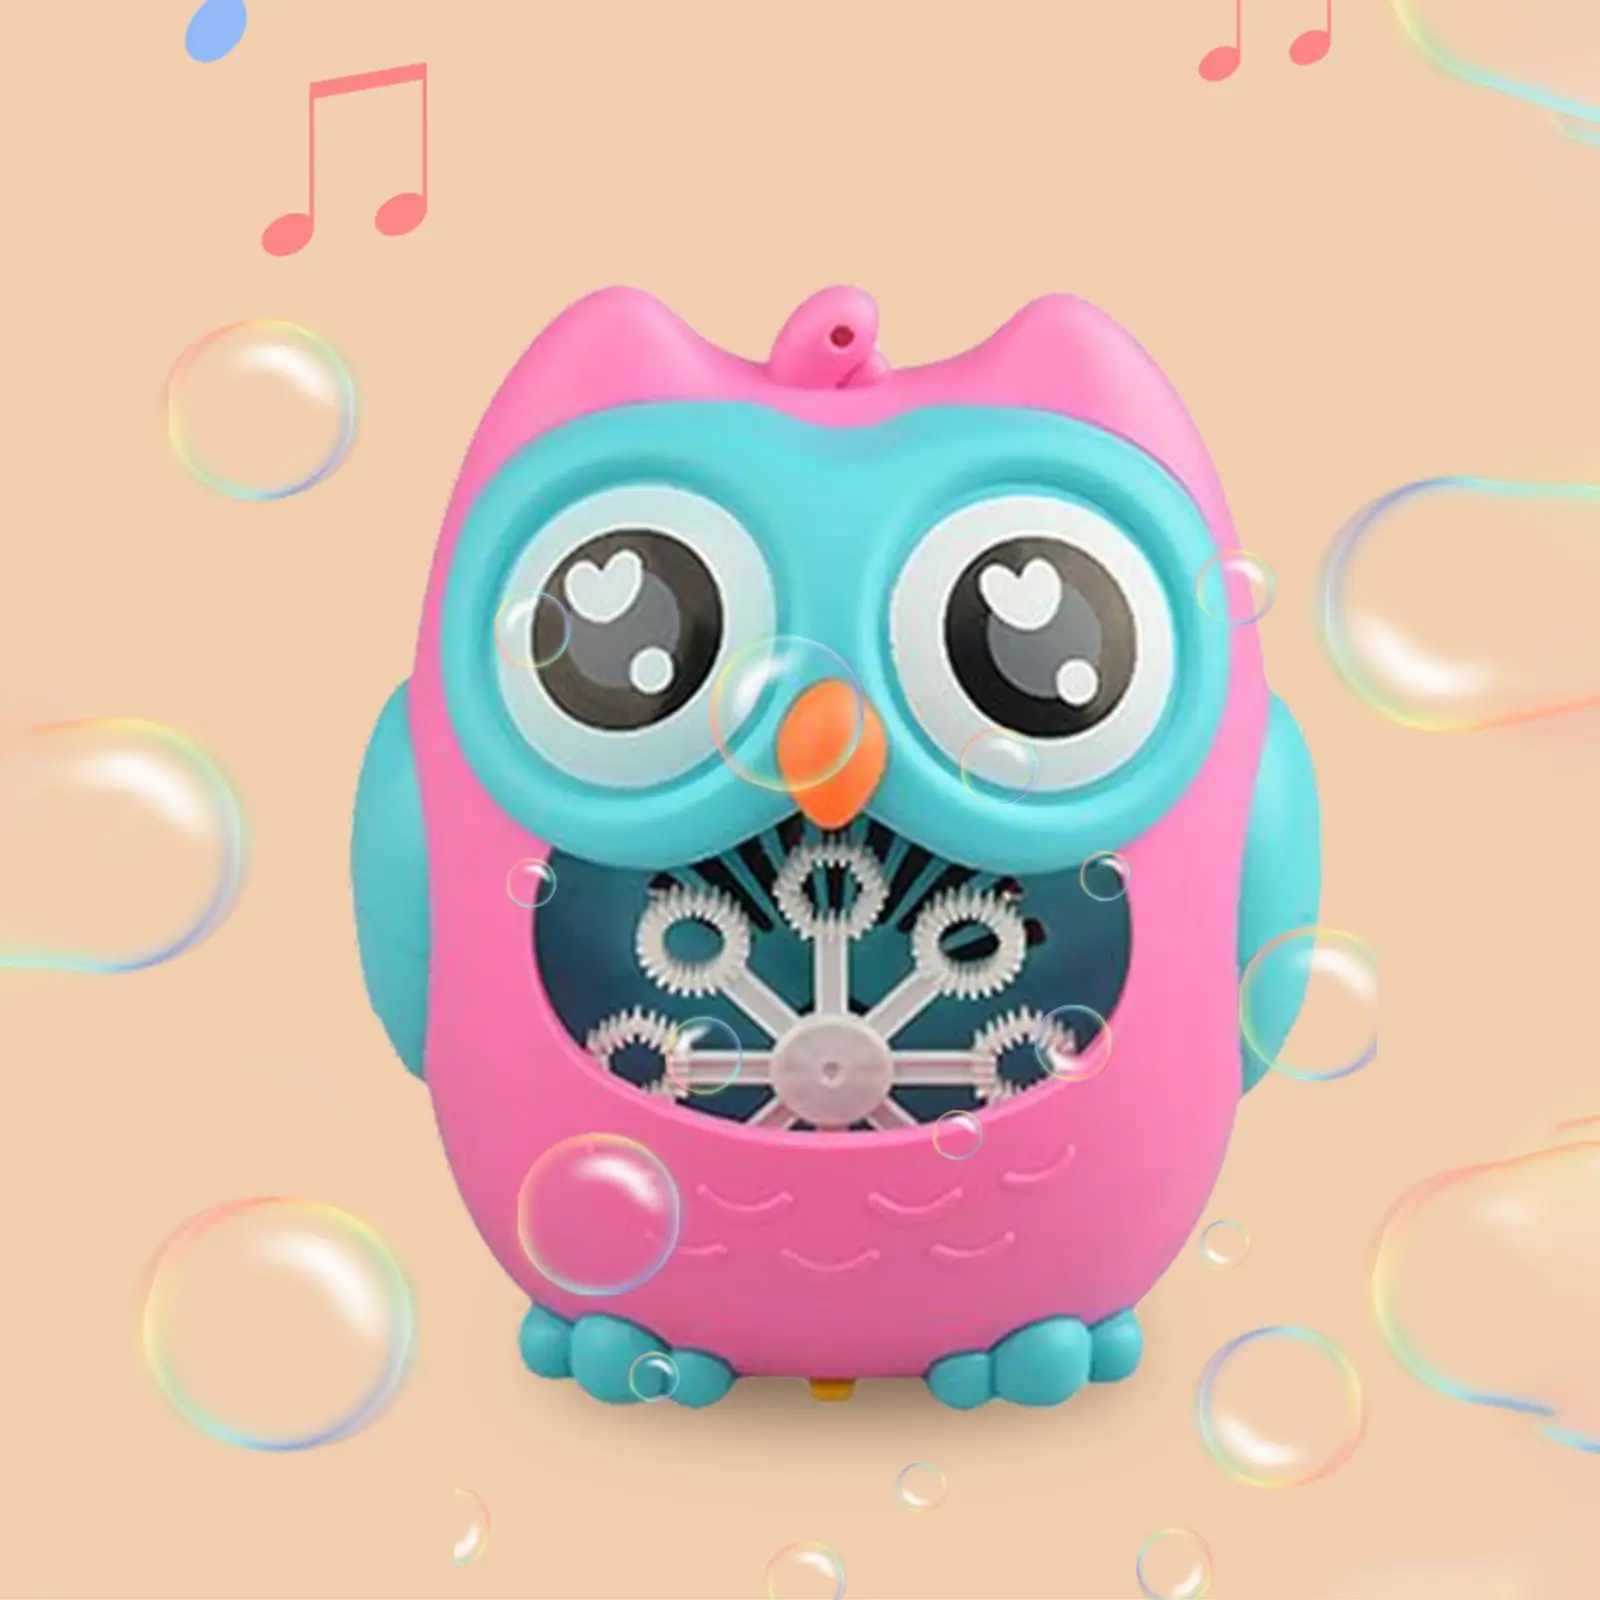 Bubble Blower Set, Electric W/ Music Lights Kid Gift Owl Octopus Options Bubble Gun for Outdoor